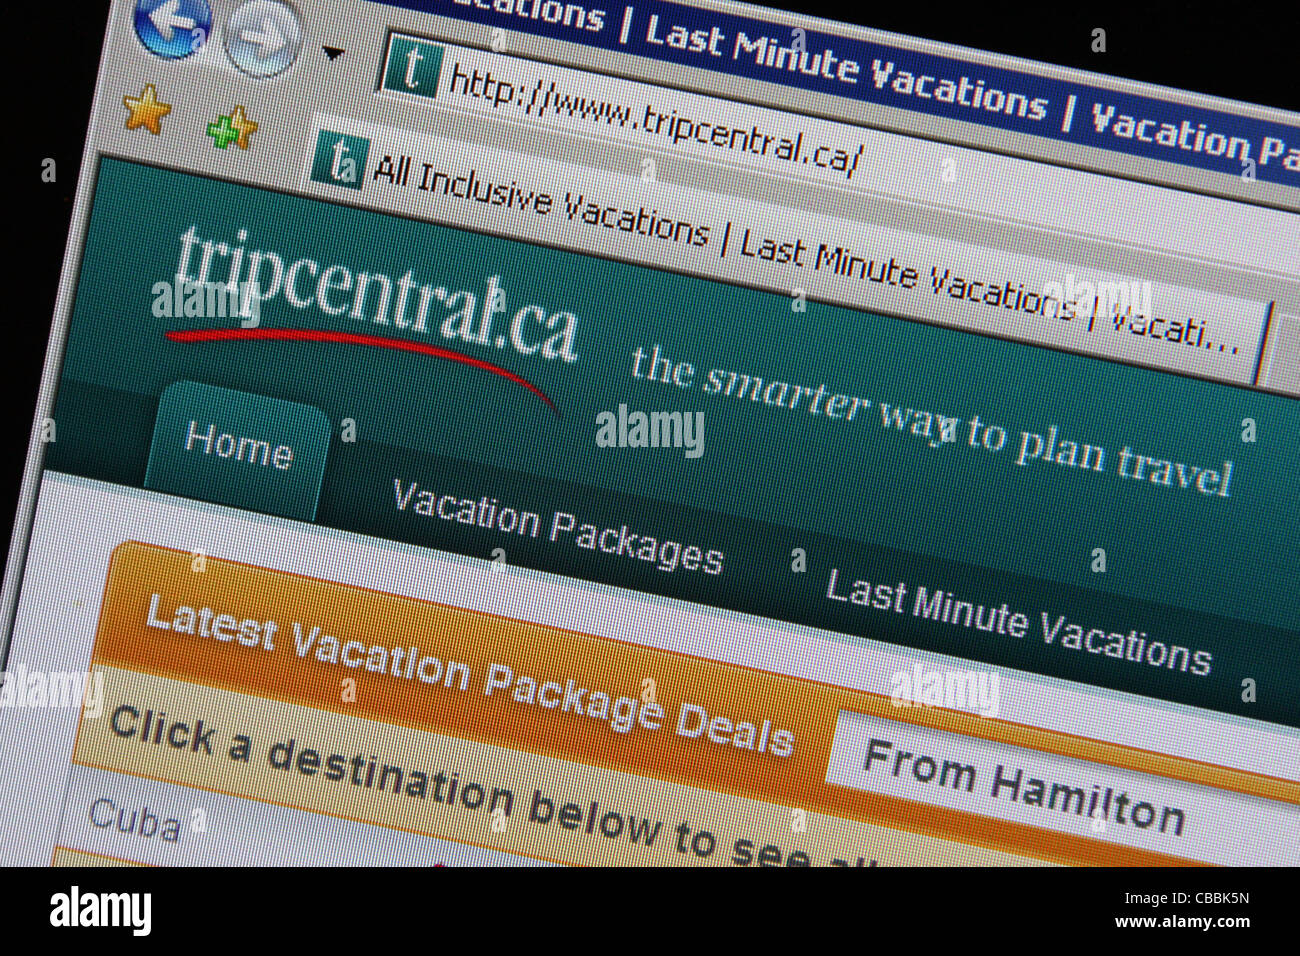 Tripcentral-tripcentral.ca-Online-Reise-website Stockfoto